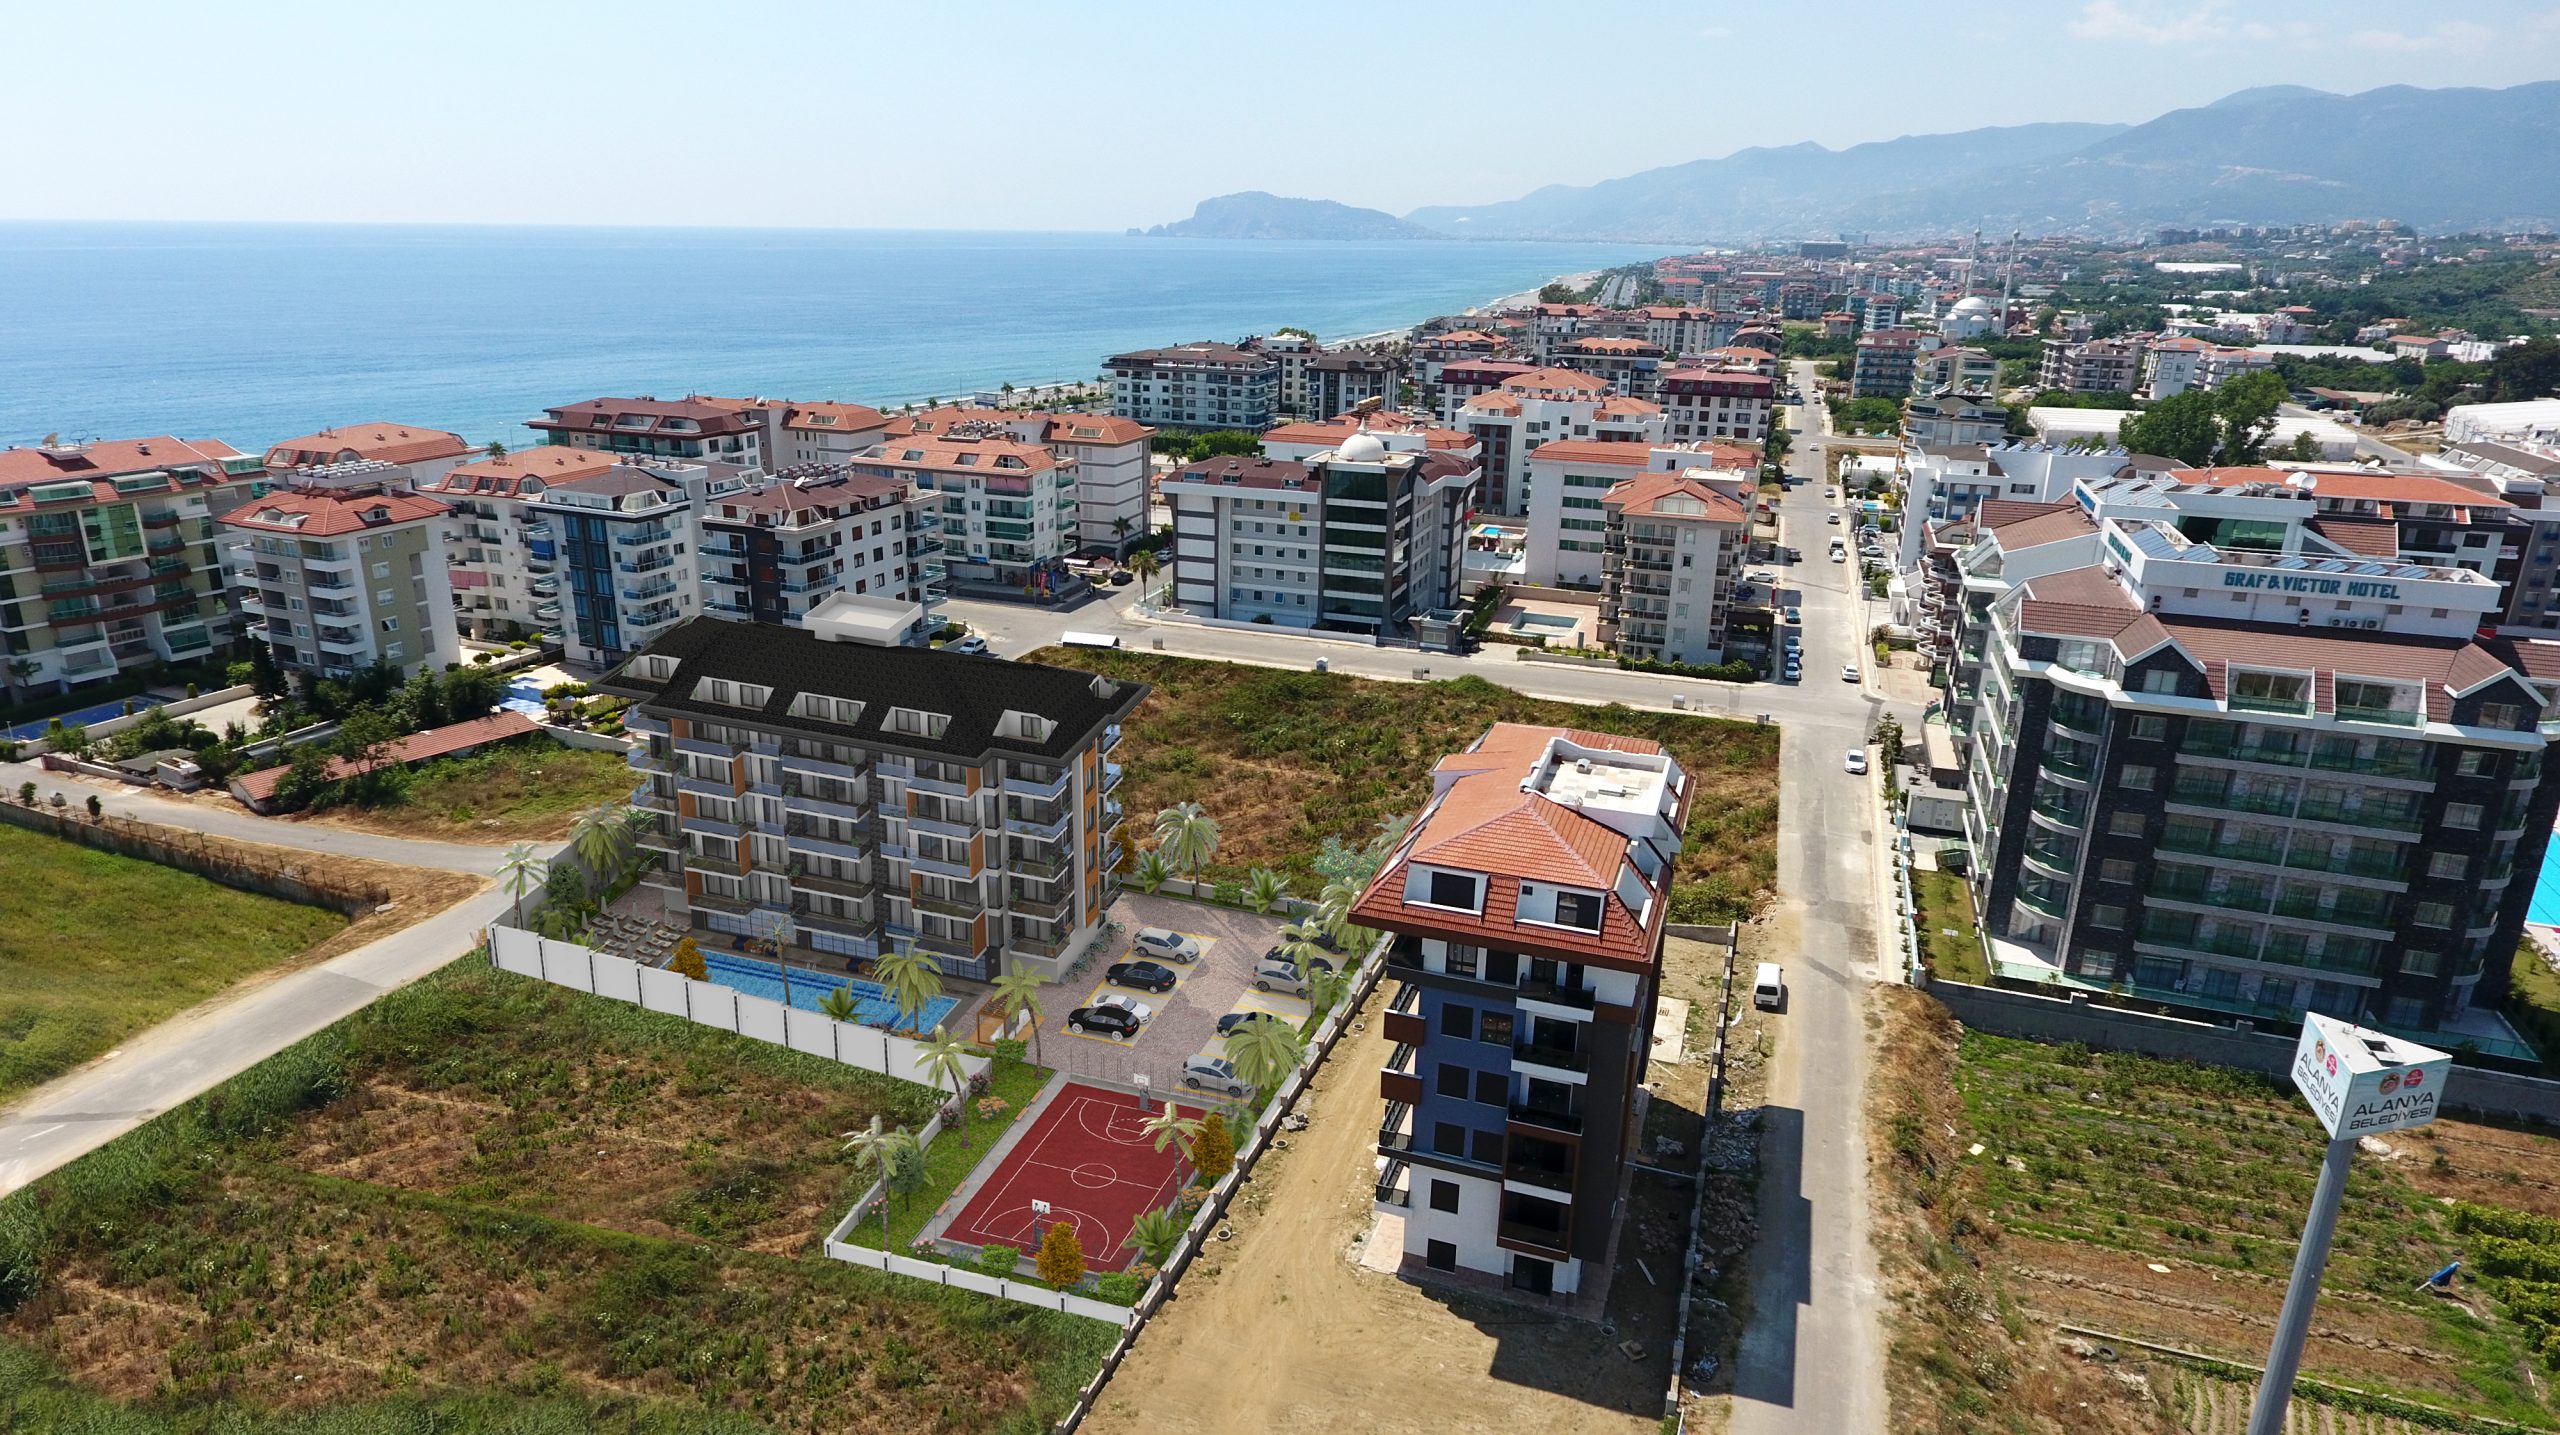 SELL MY PROPERTY IN TURKEY